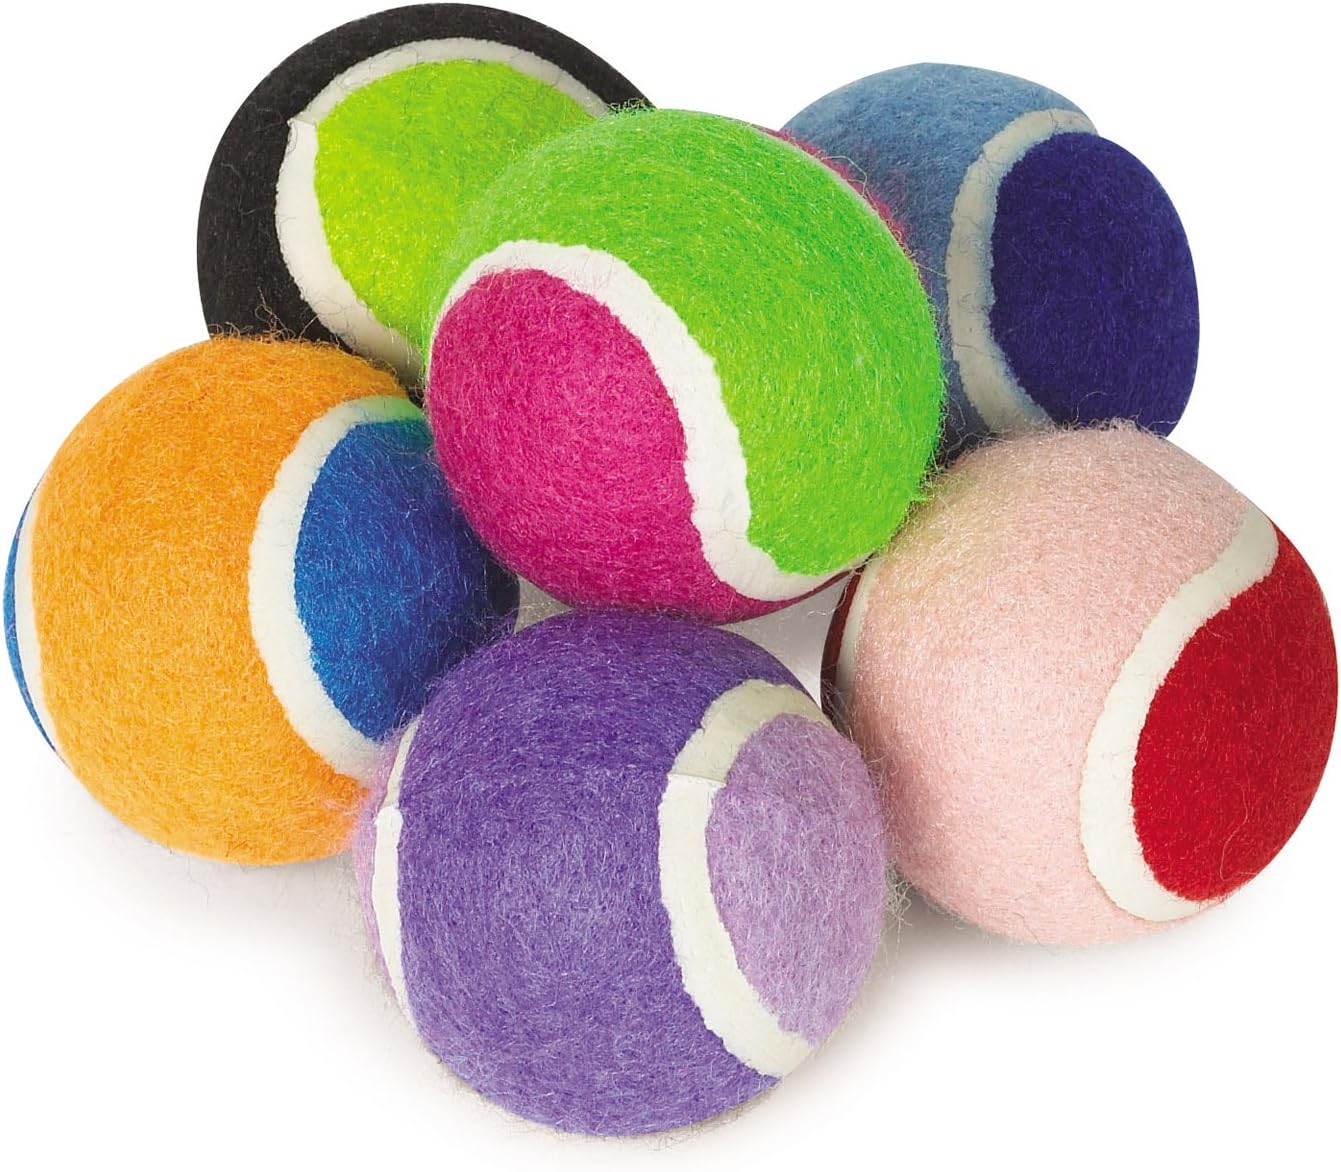 Group of small multi-colored tennis balls for dogs